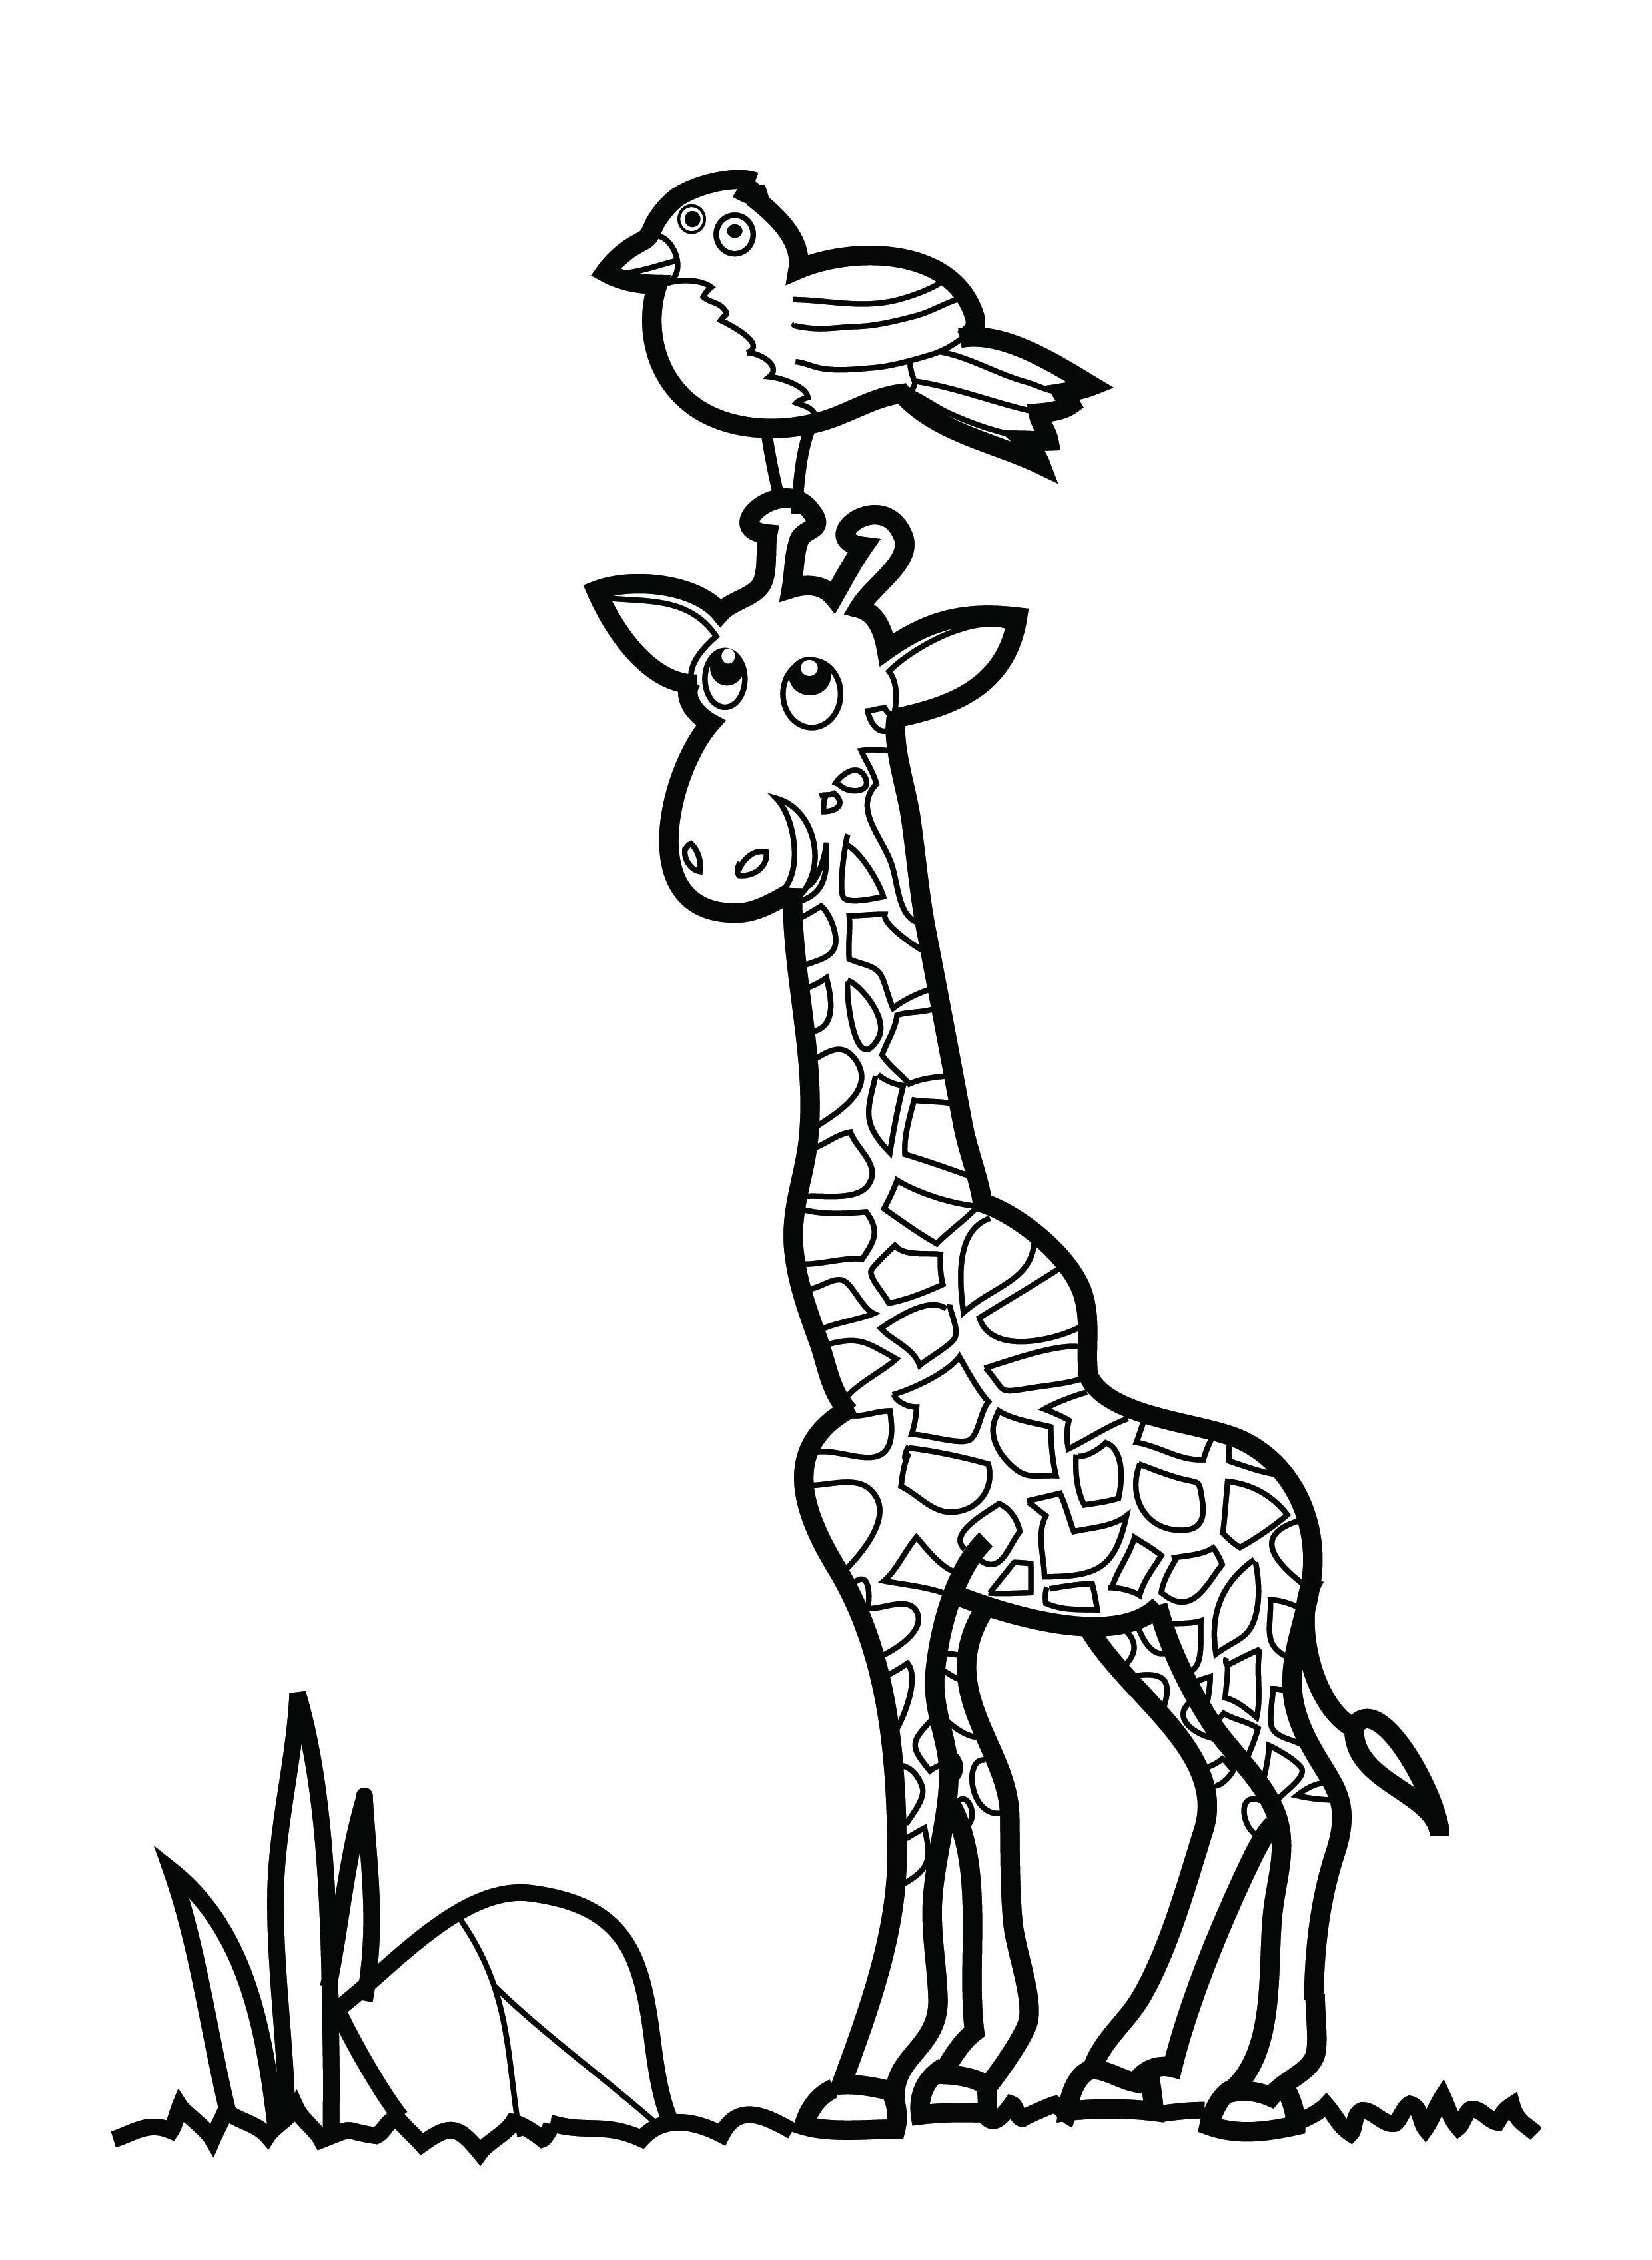 Coloring Page of Giraffe Coloring Page